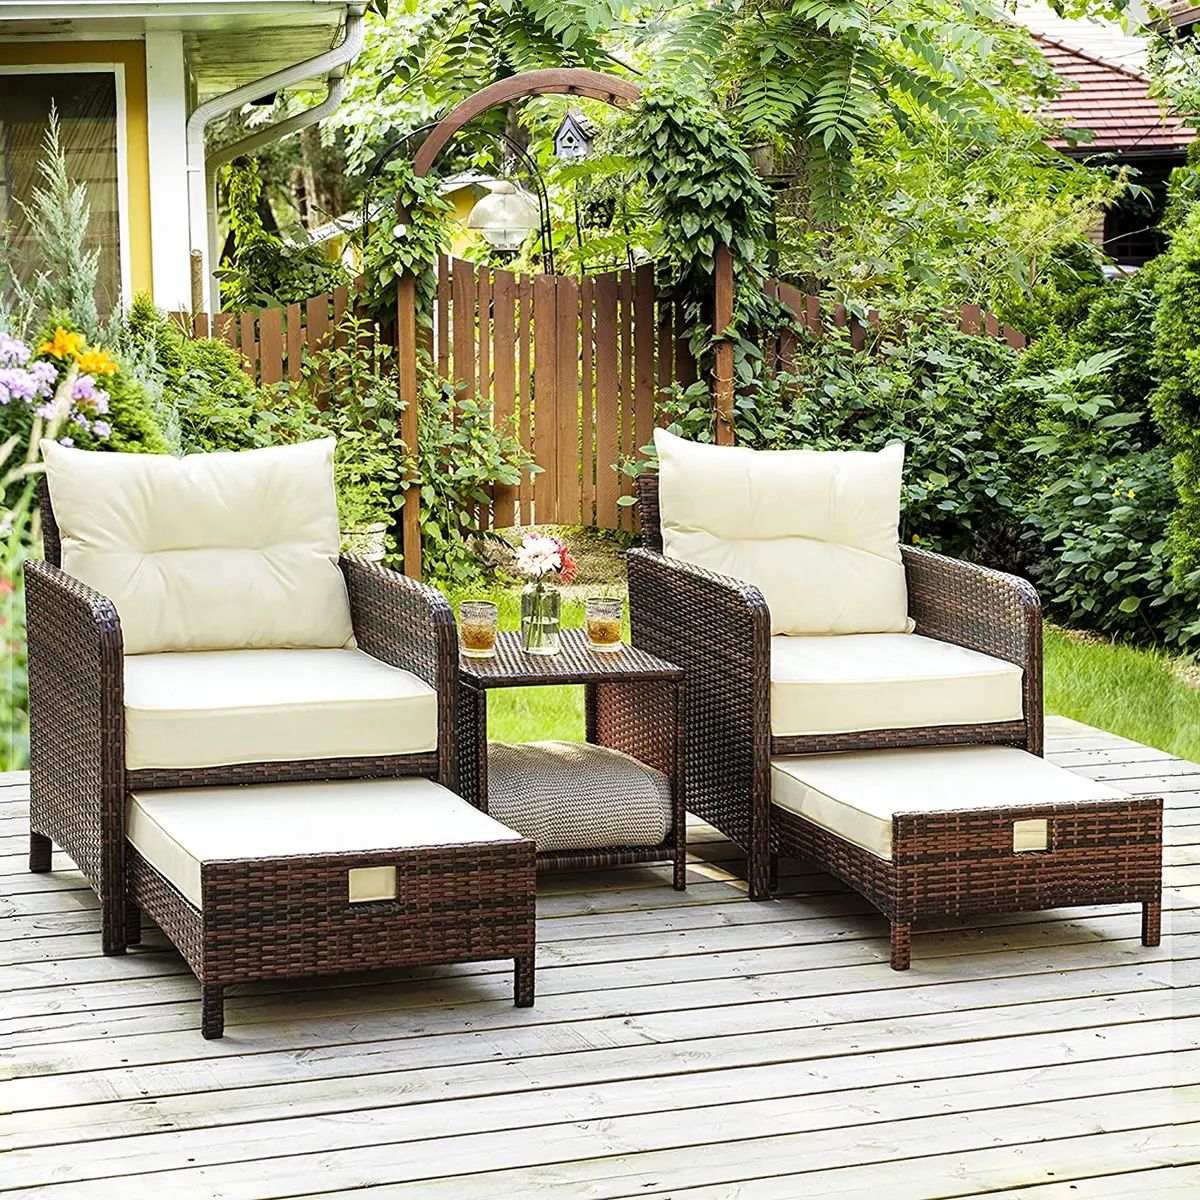 Ebay With Regard To Ottomans Patio Furniture Set (View 8 of 15)